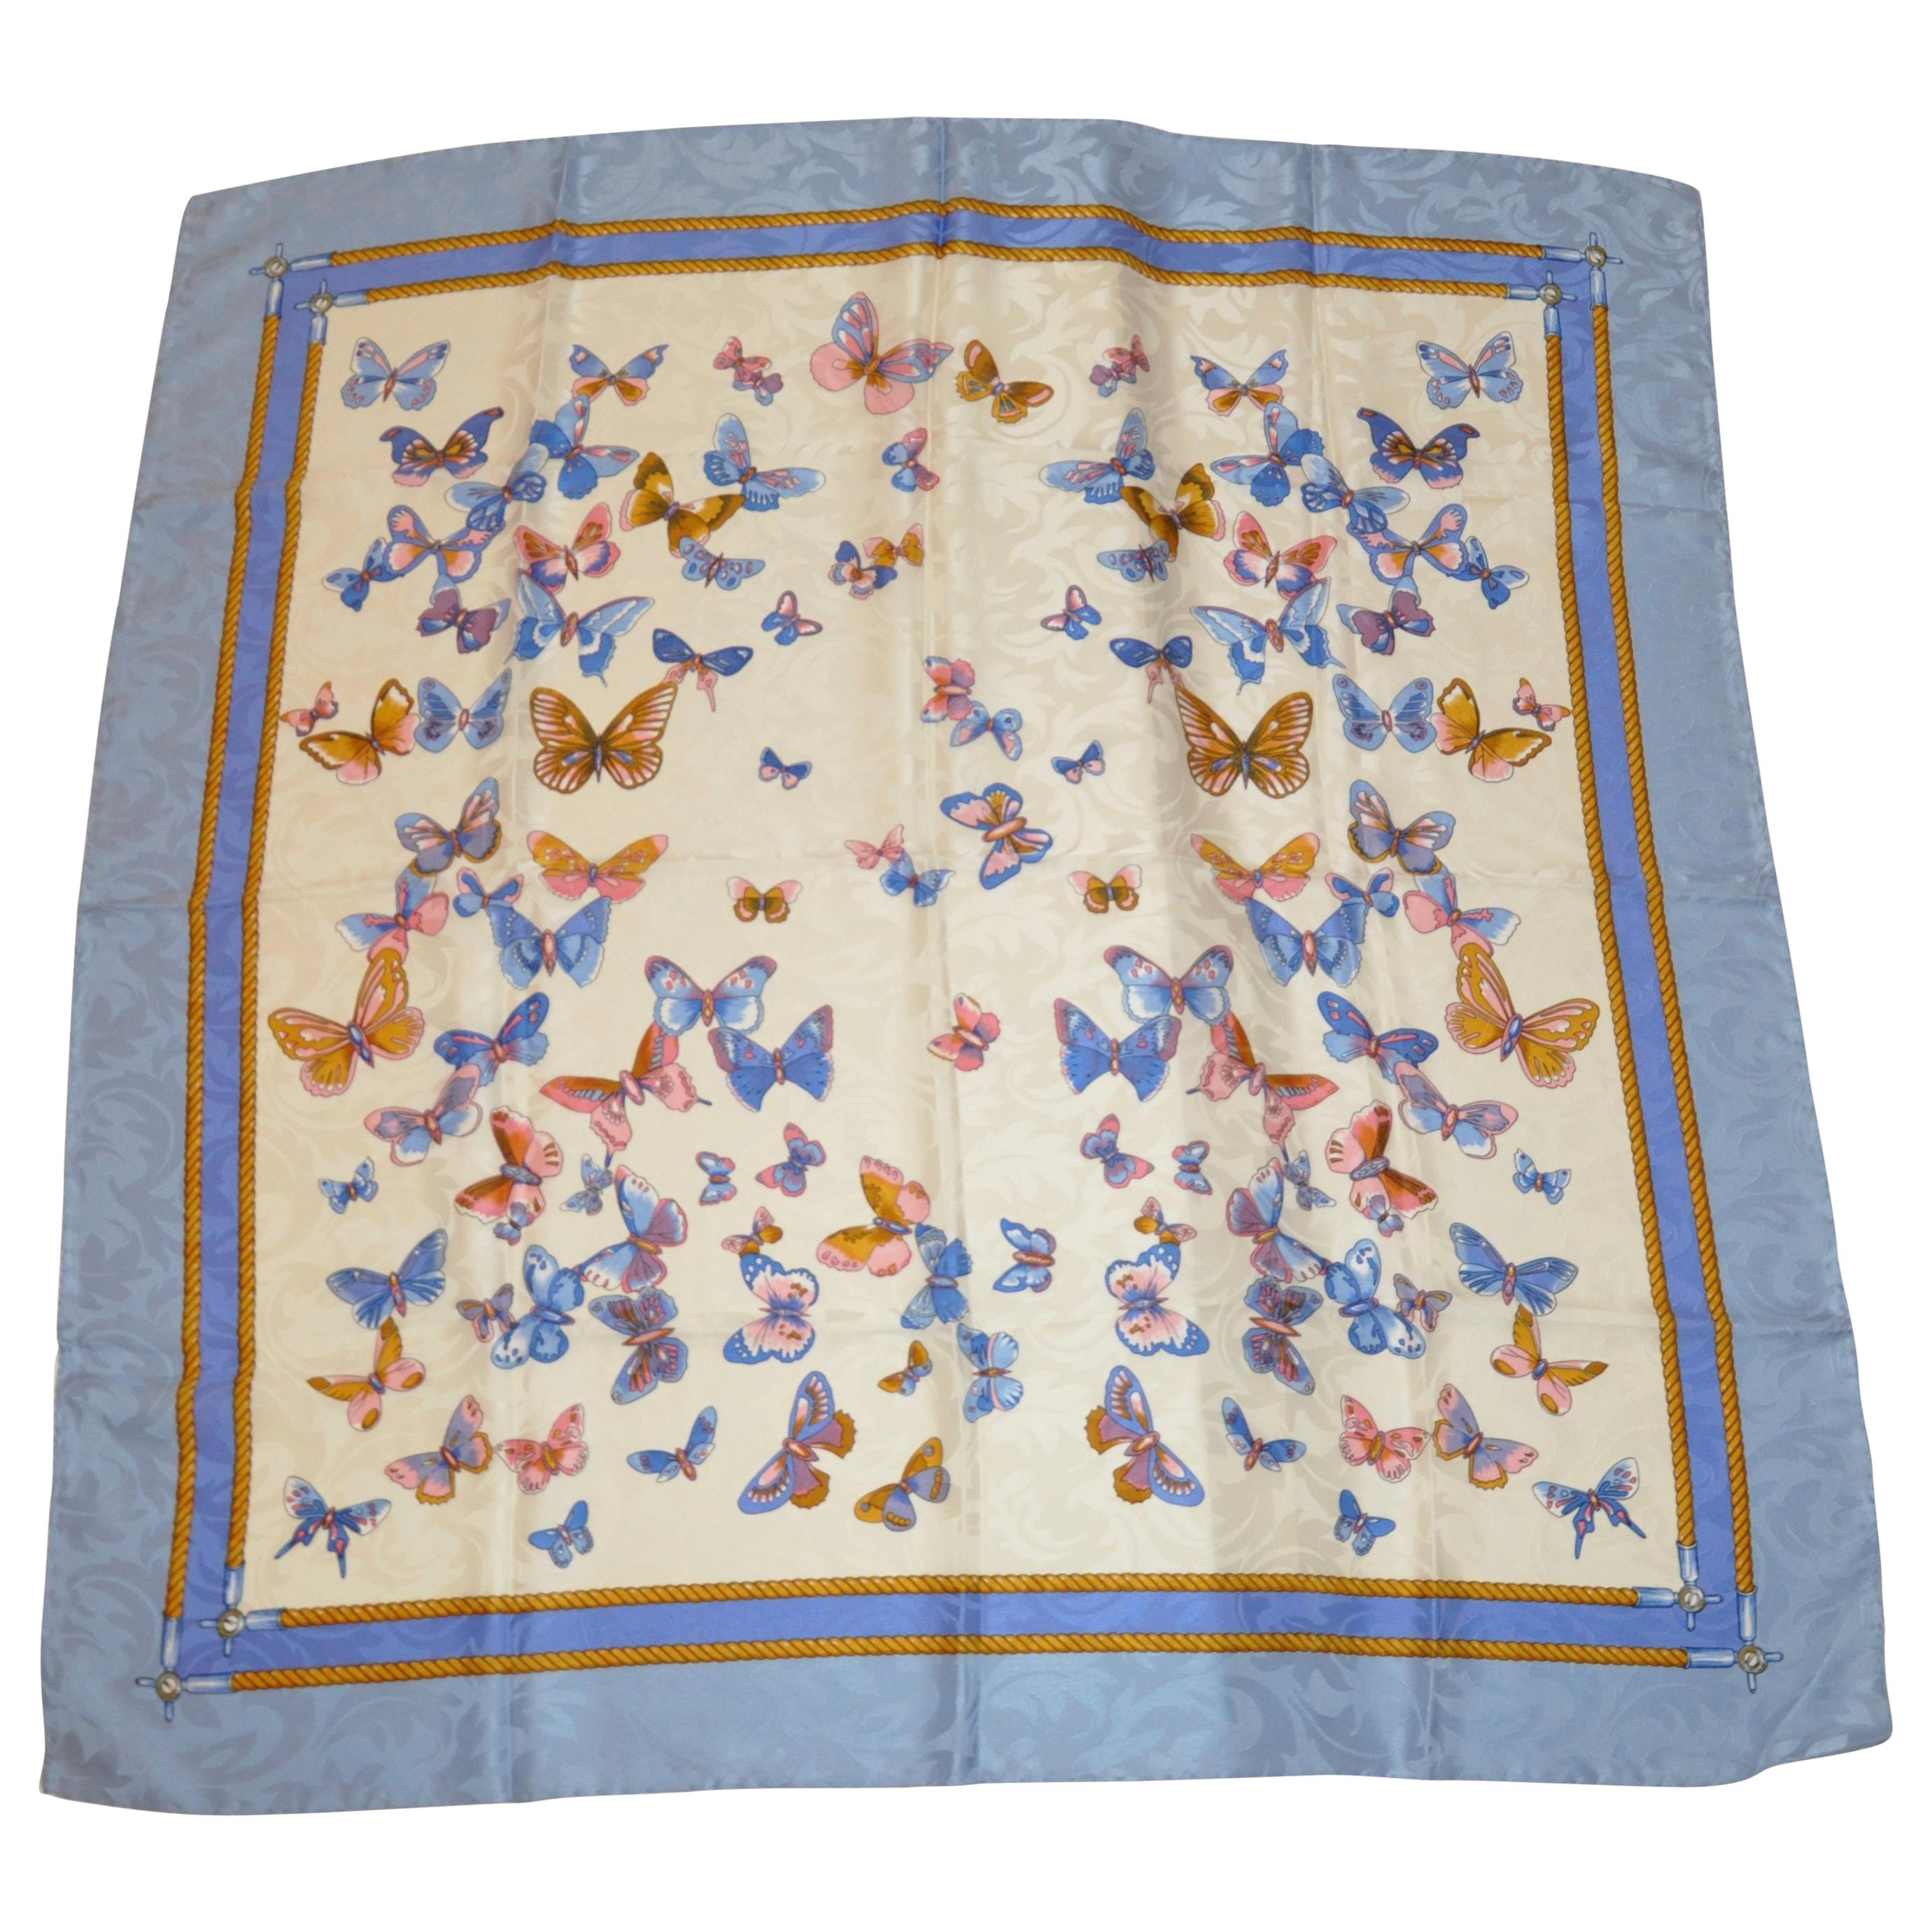 Shades of Blues and Ivory "Bursting Show of Butterflies" Silk Scarf